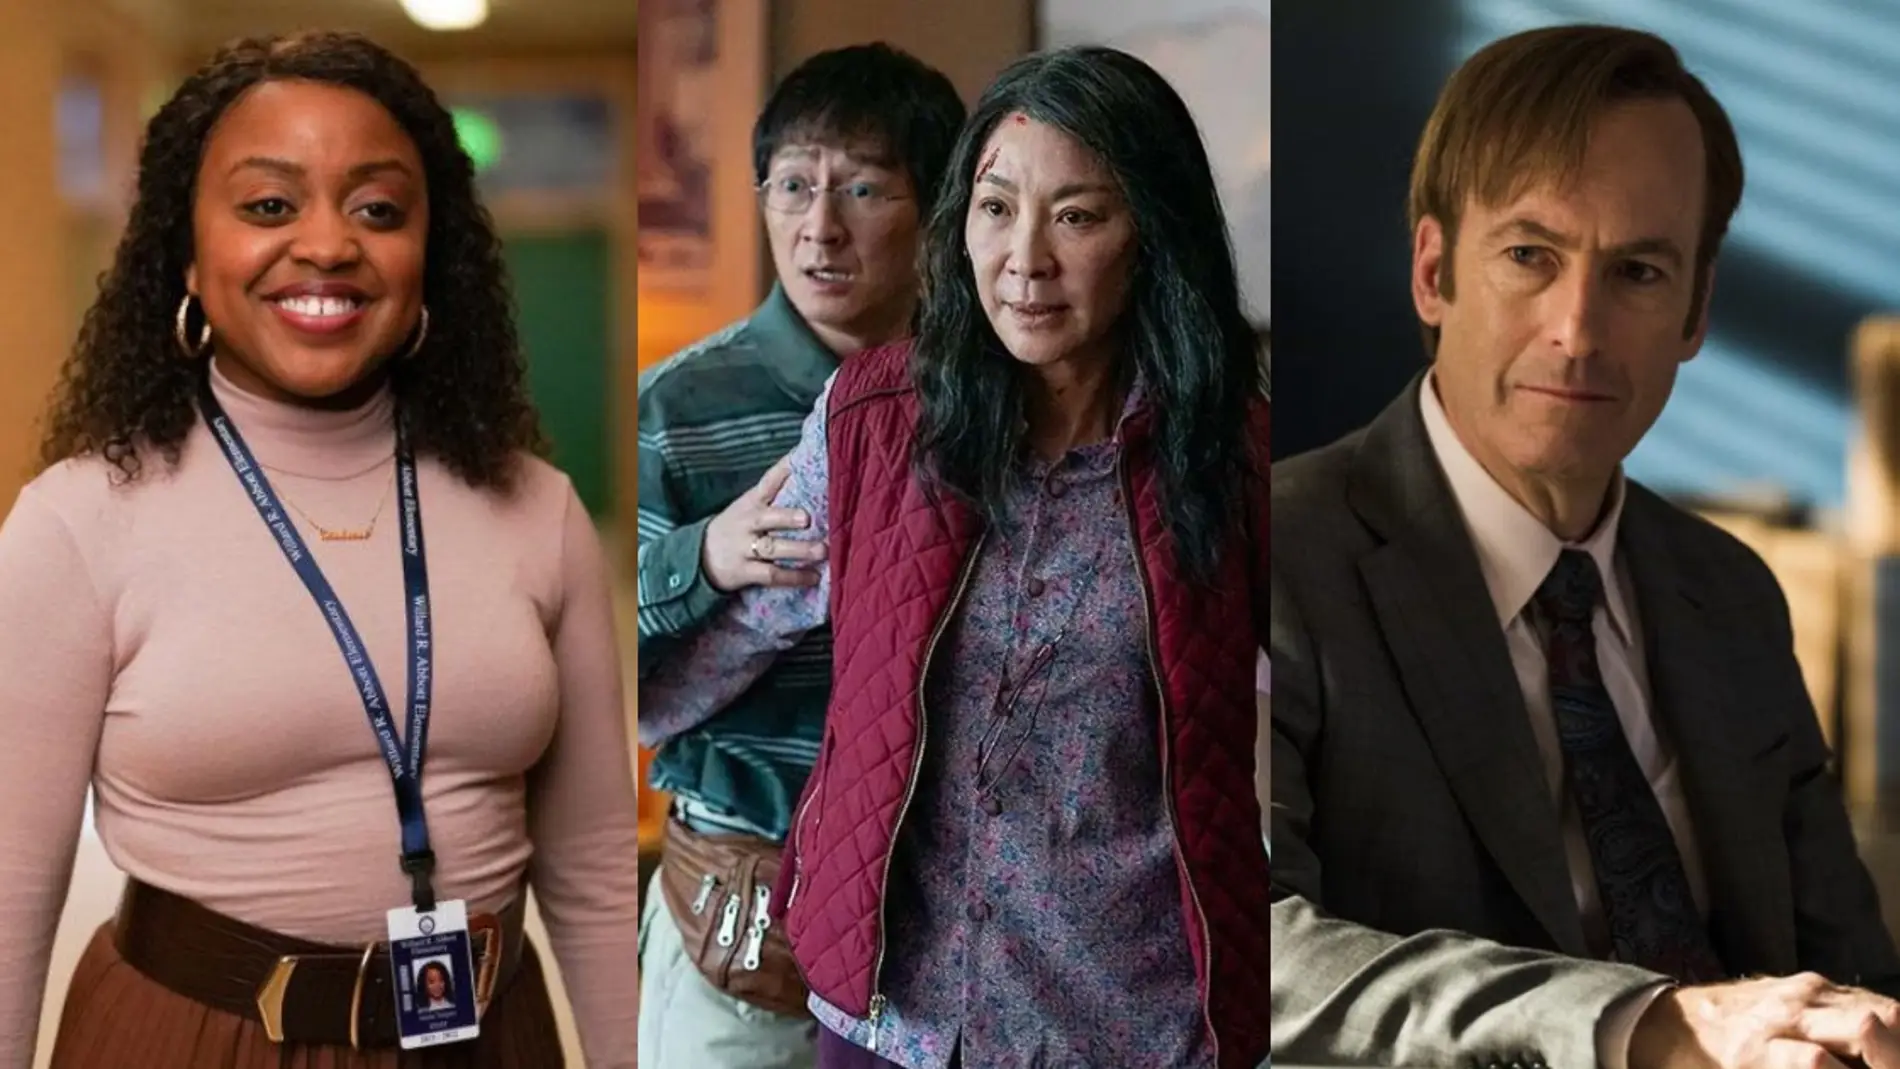  &#39;Everything Everywhere All at Once&#39;, &#39;Abbott Elementary&#39; y &#39;Better Call Saul&#39;, triunfan en los Critics Choice Awards 2023